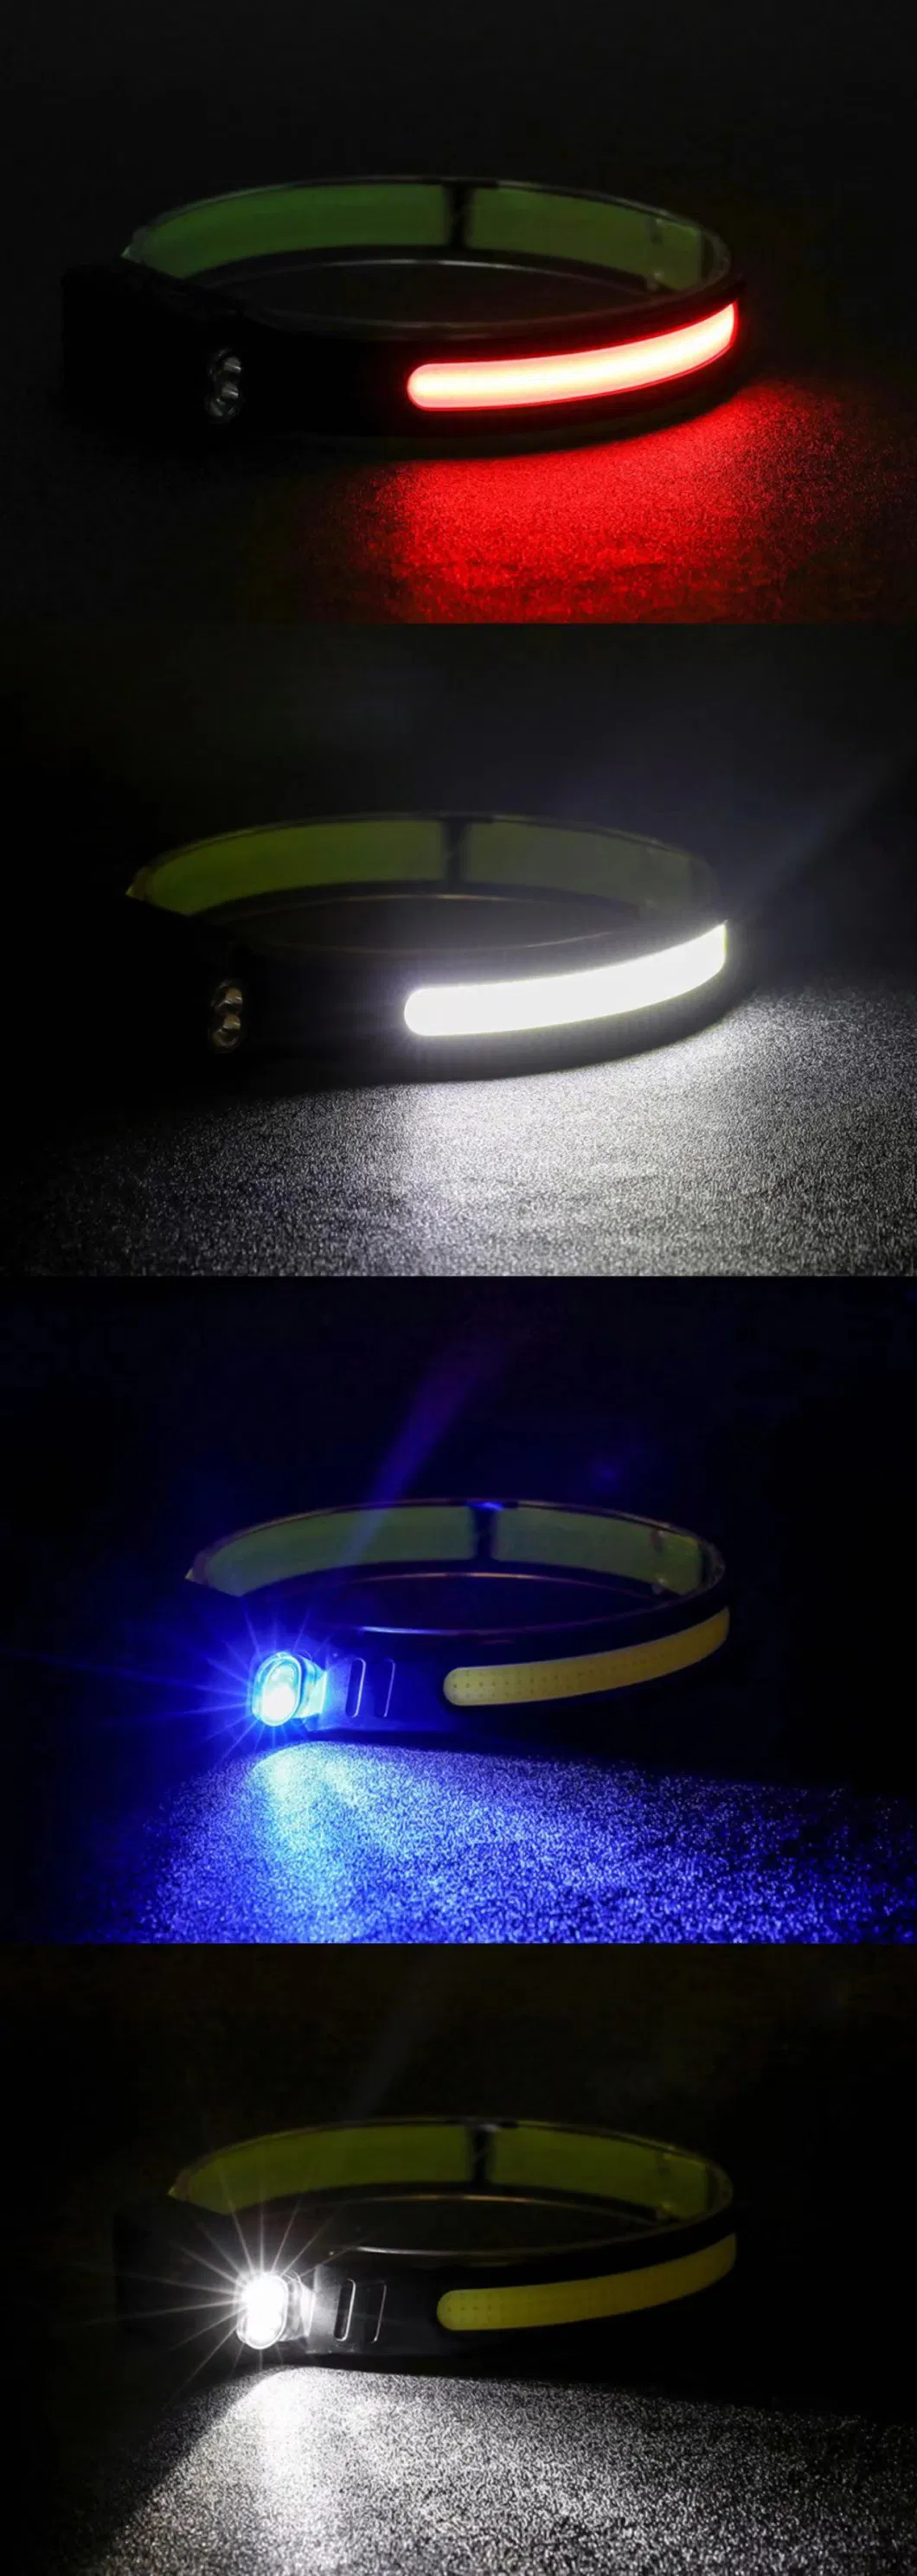 Head Torch Chargeable Band Induction Head Lamp COB Fishing Running Headlamp